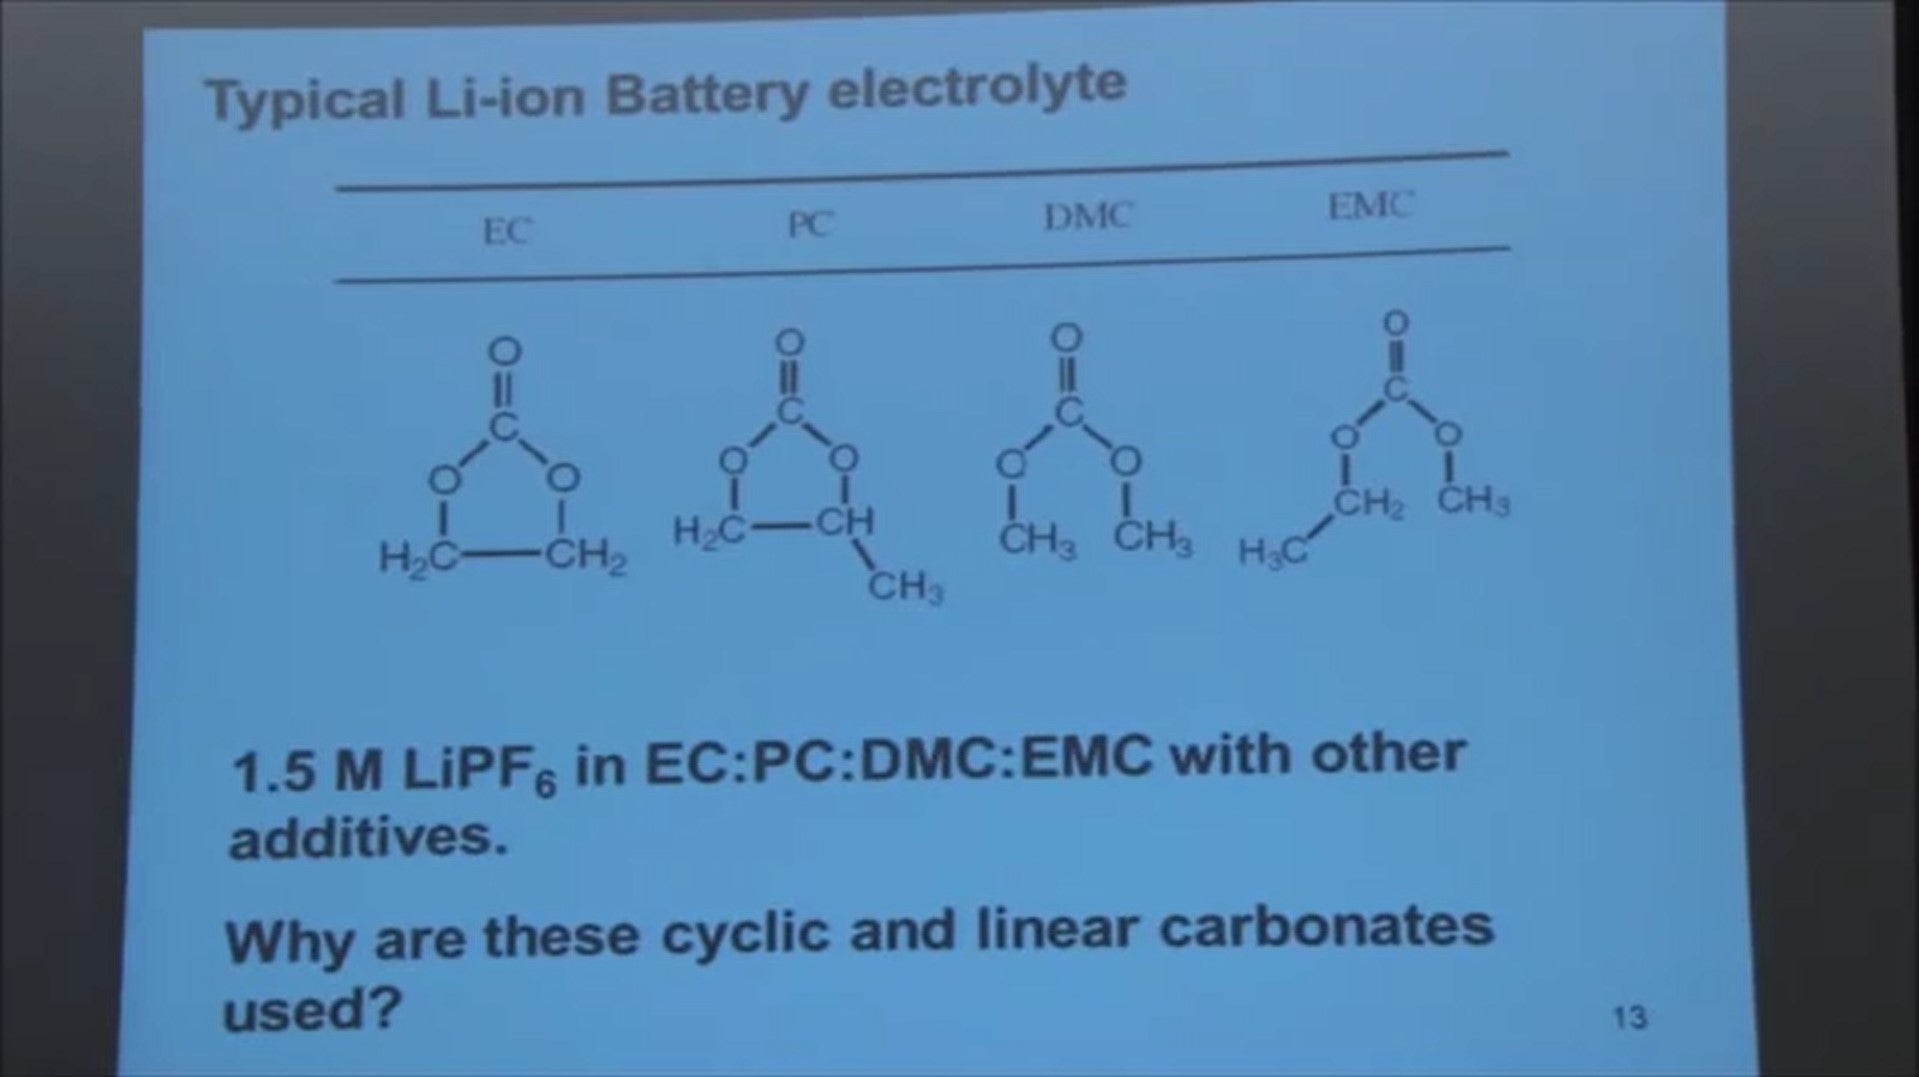 typical lithium-ion cell electrolyte